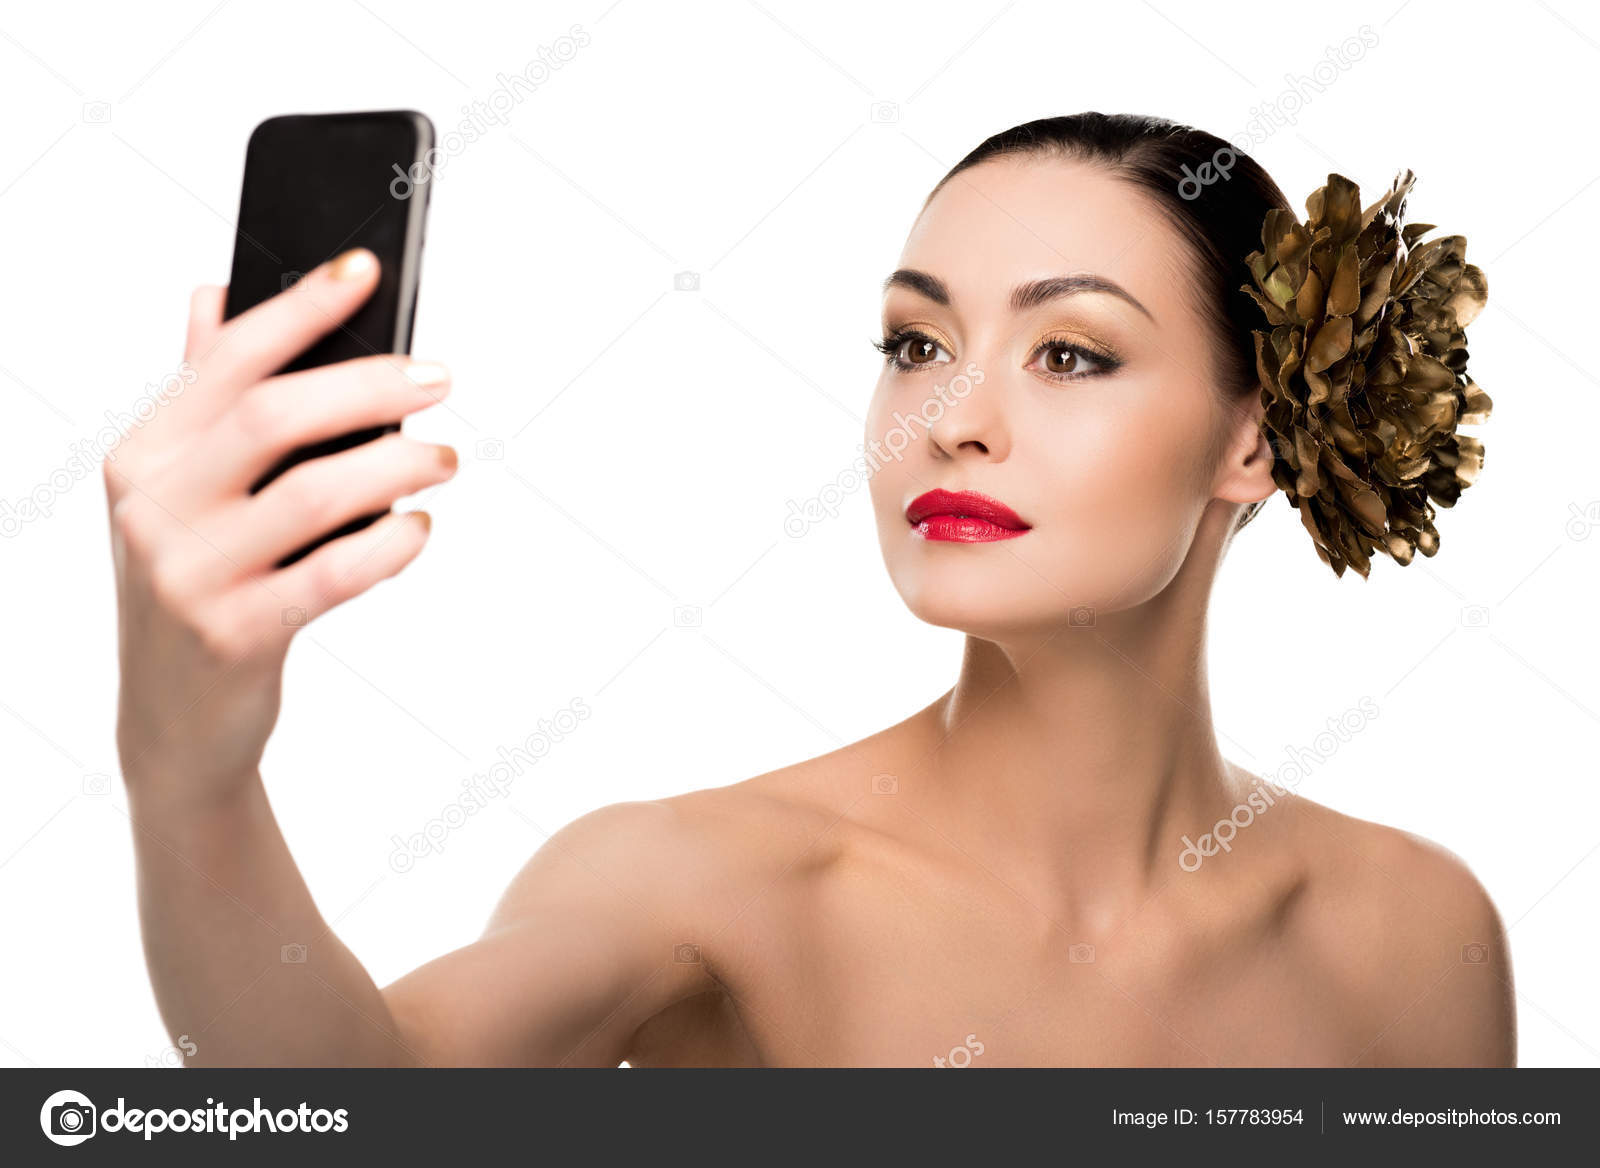 Young woman taking selfie — Stock Photo © DmitryPoch 